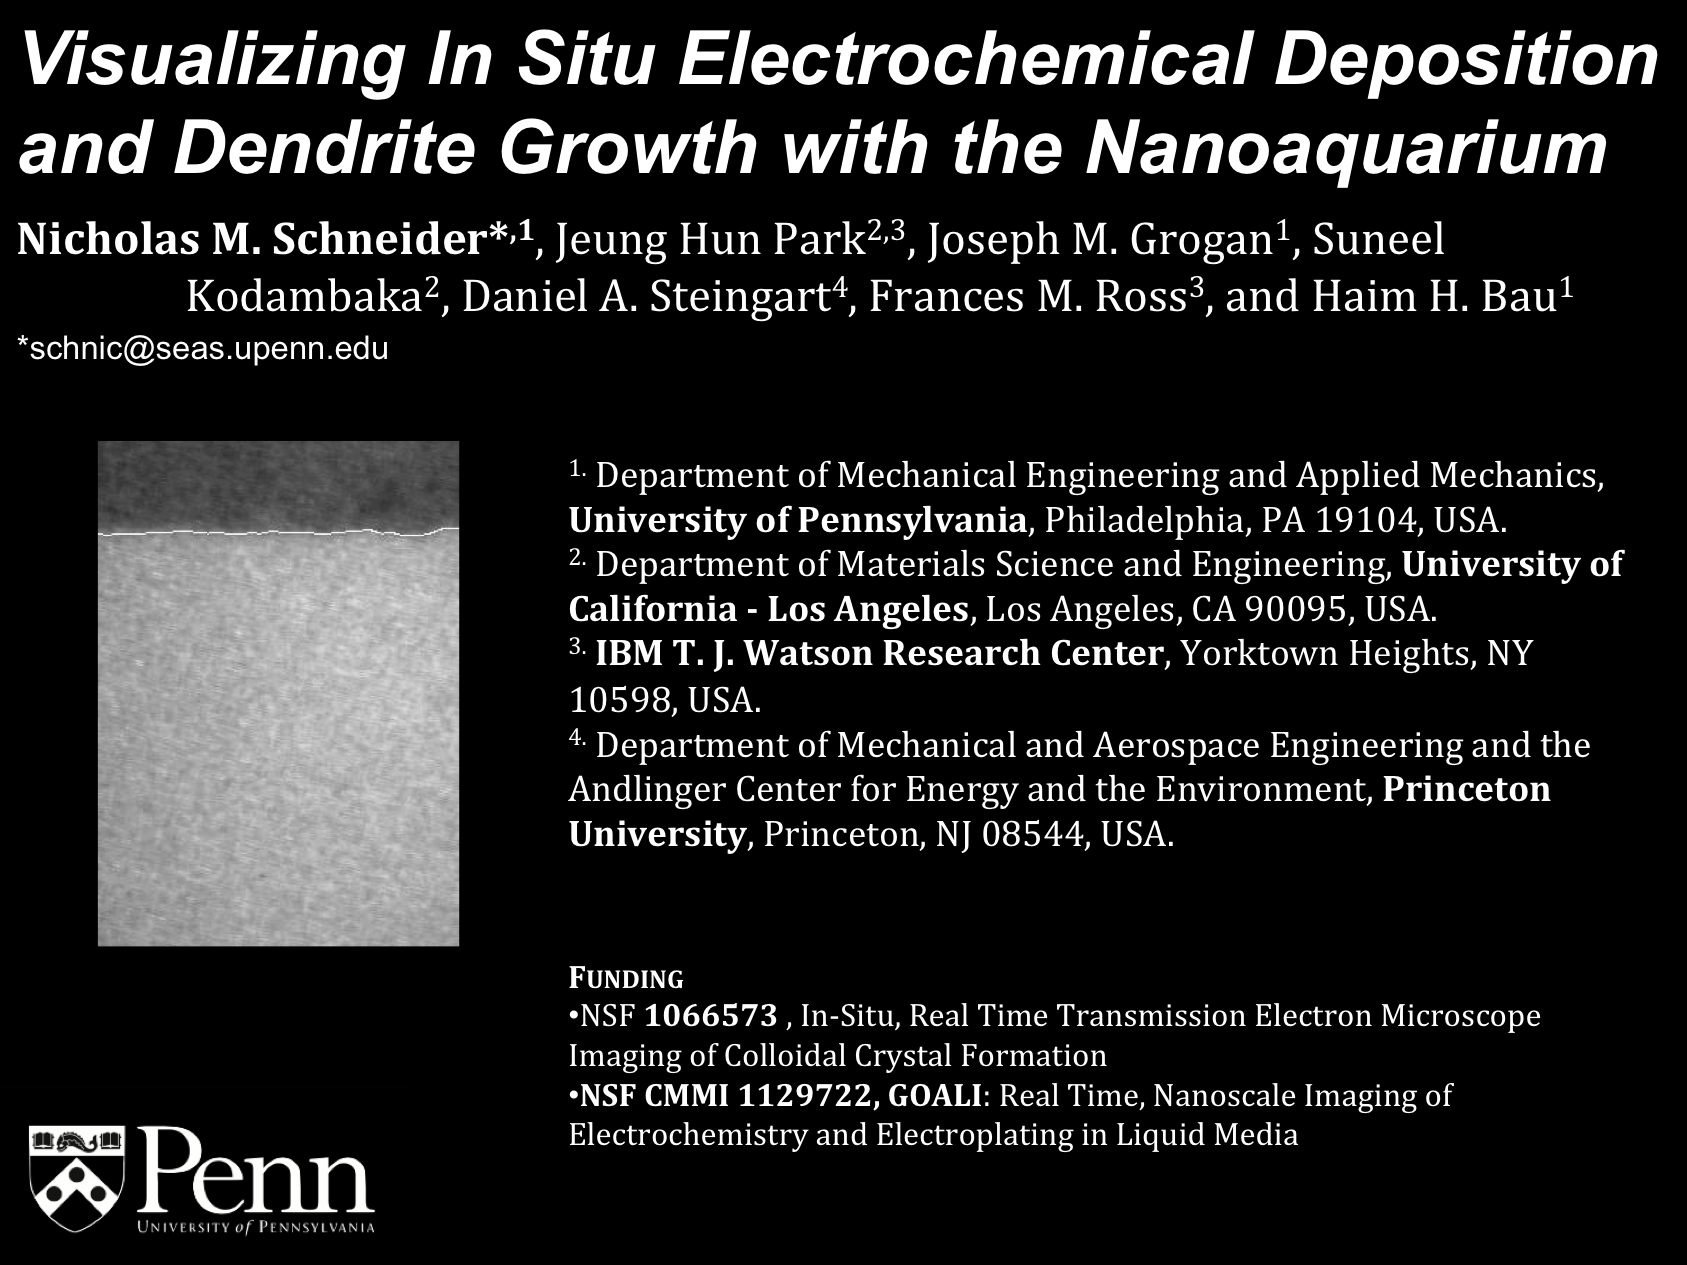 MRS Fall 2013 - Visualizing In Situ Electrochemical Deposition and Dendrite Growth with the Nanoaquarium